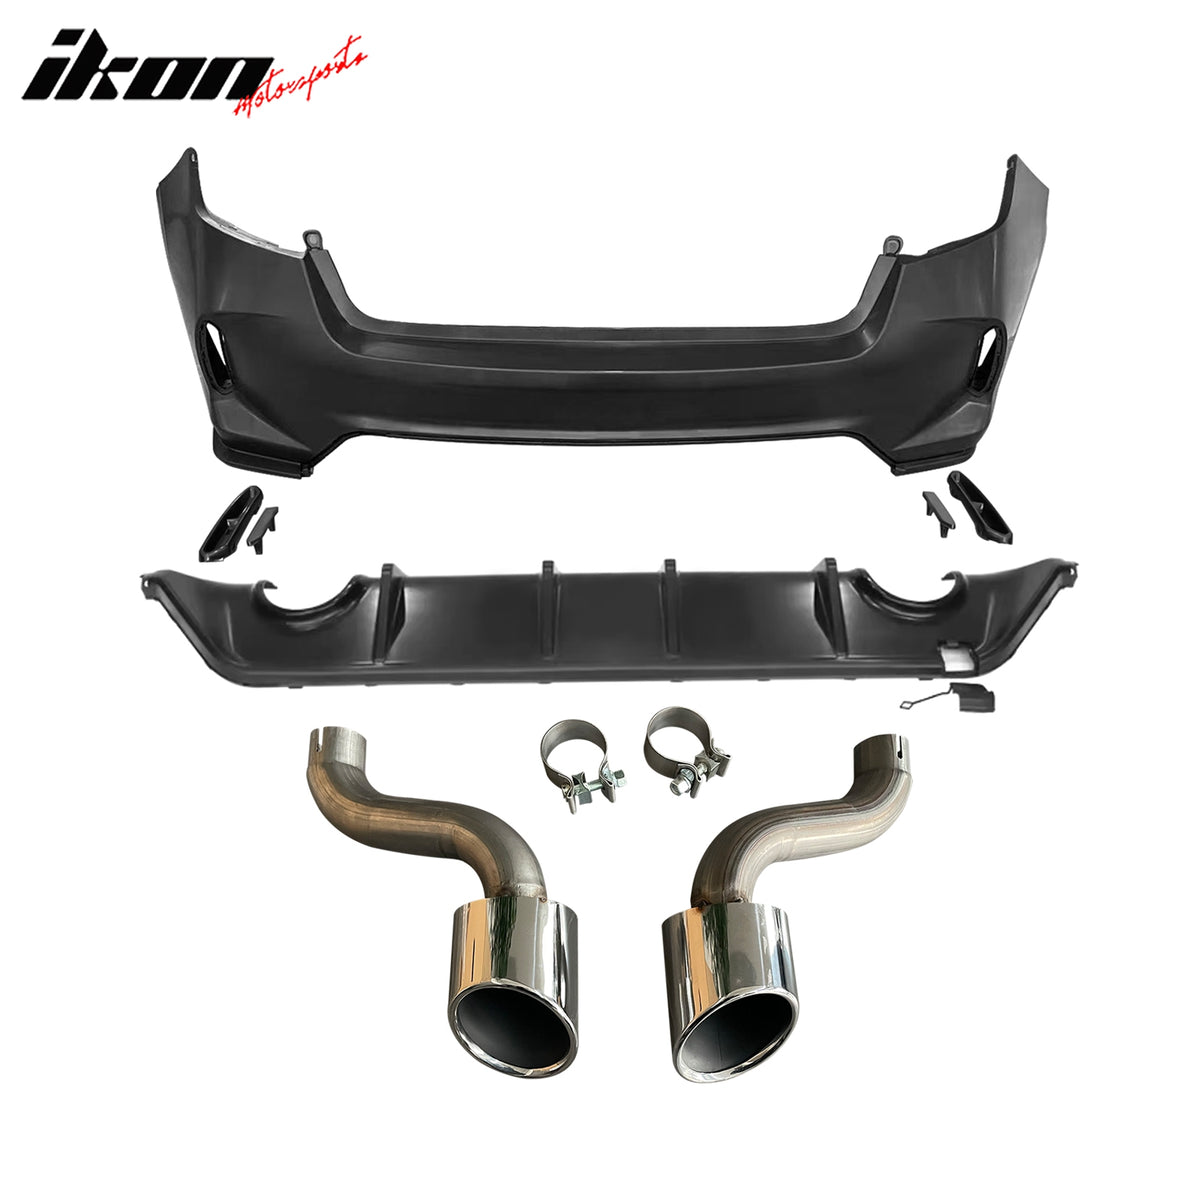 Fits 22-24 Civic Sedan Type R Style Rear Bumper Cover & Diffuser & Exhaust Pipe